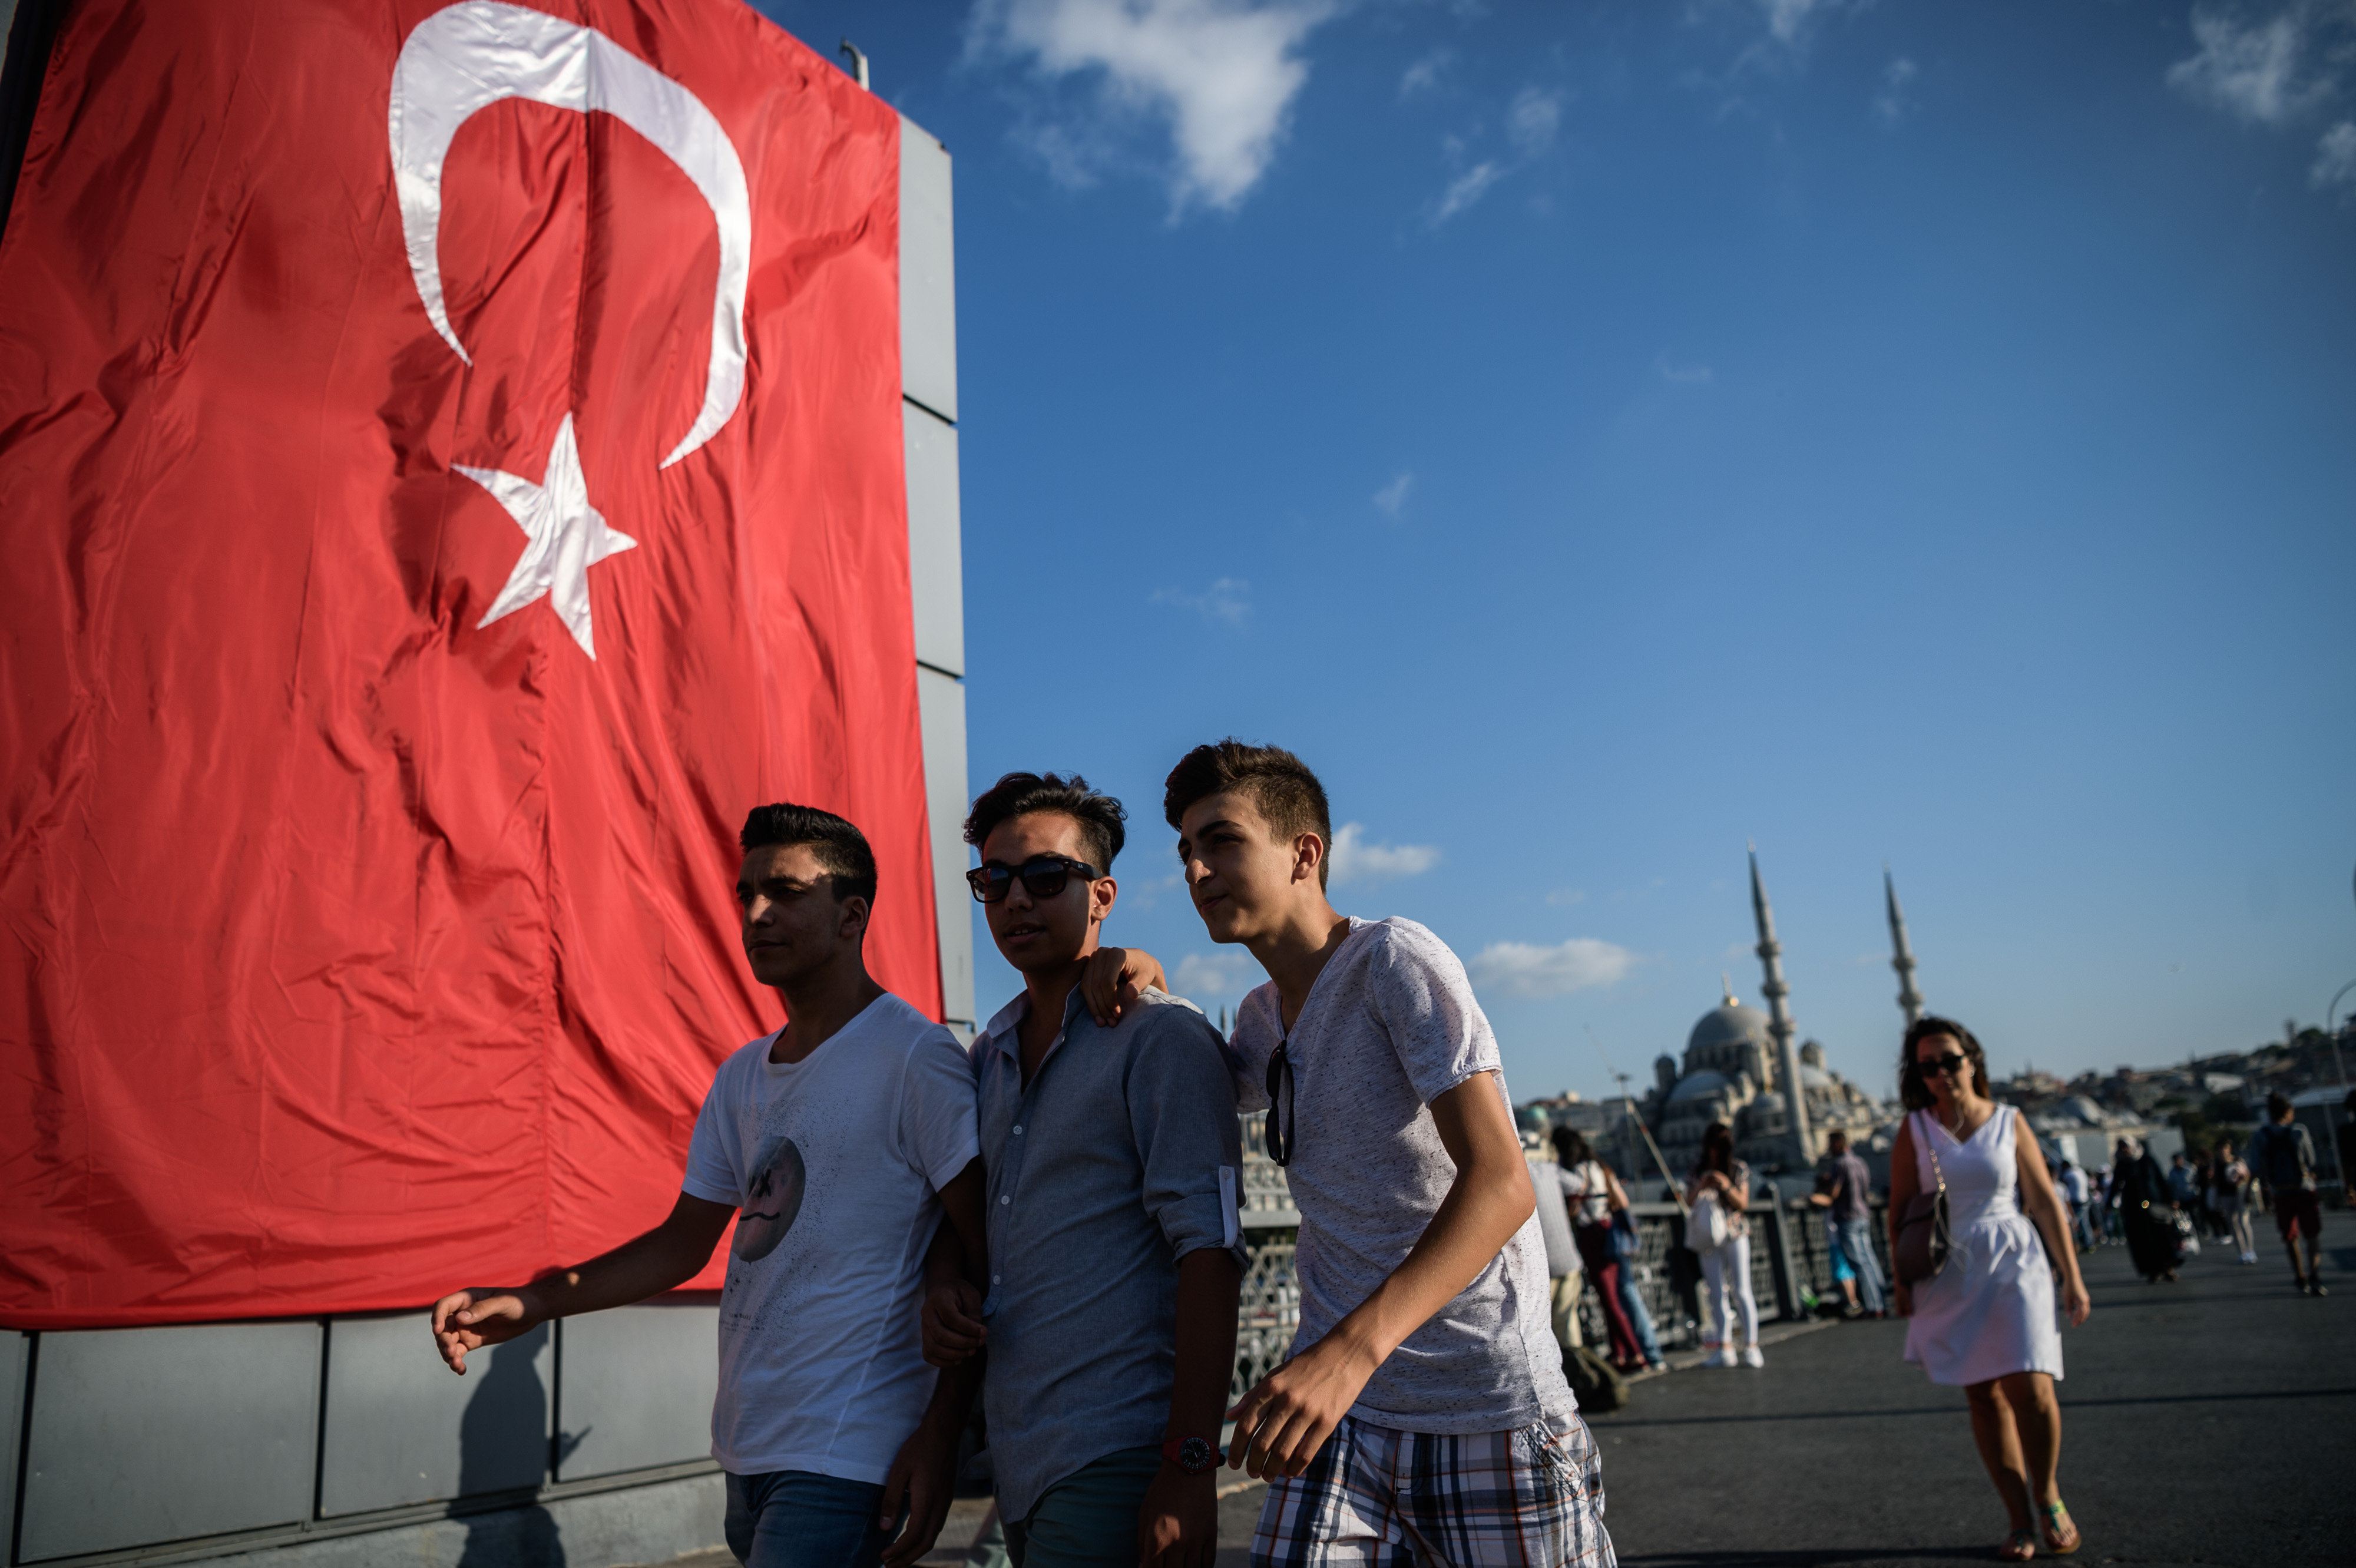 In the future, will Turkey be a little, or a lot, democratic?